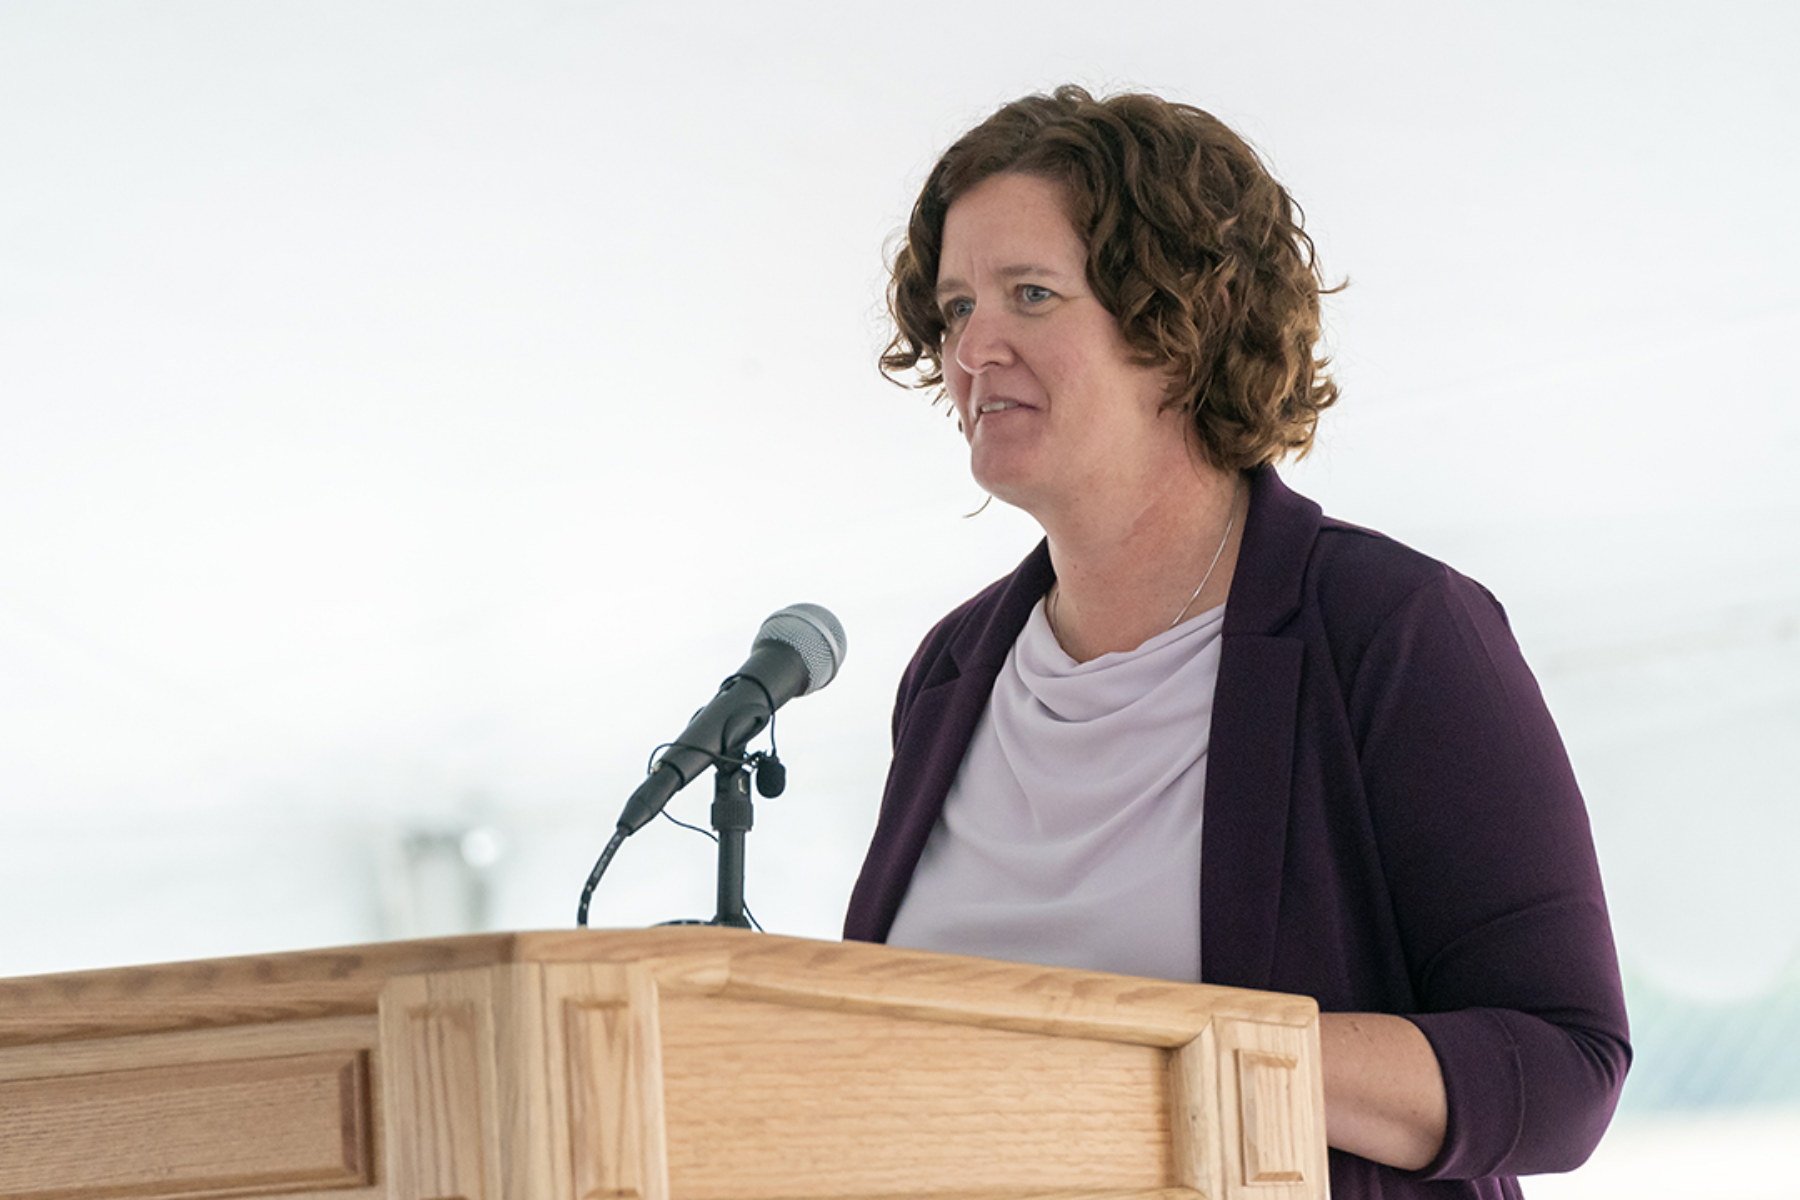 IDOC Commissioner Christina Reagle speaks on Thursday, Sep. 28, 2023 during a groundbreaking for the new $1.2 Billion correctional facility under construction in Westville, Indiana. SCOTT ROBERSON | Indiana Department of Correction